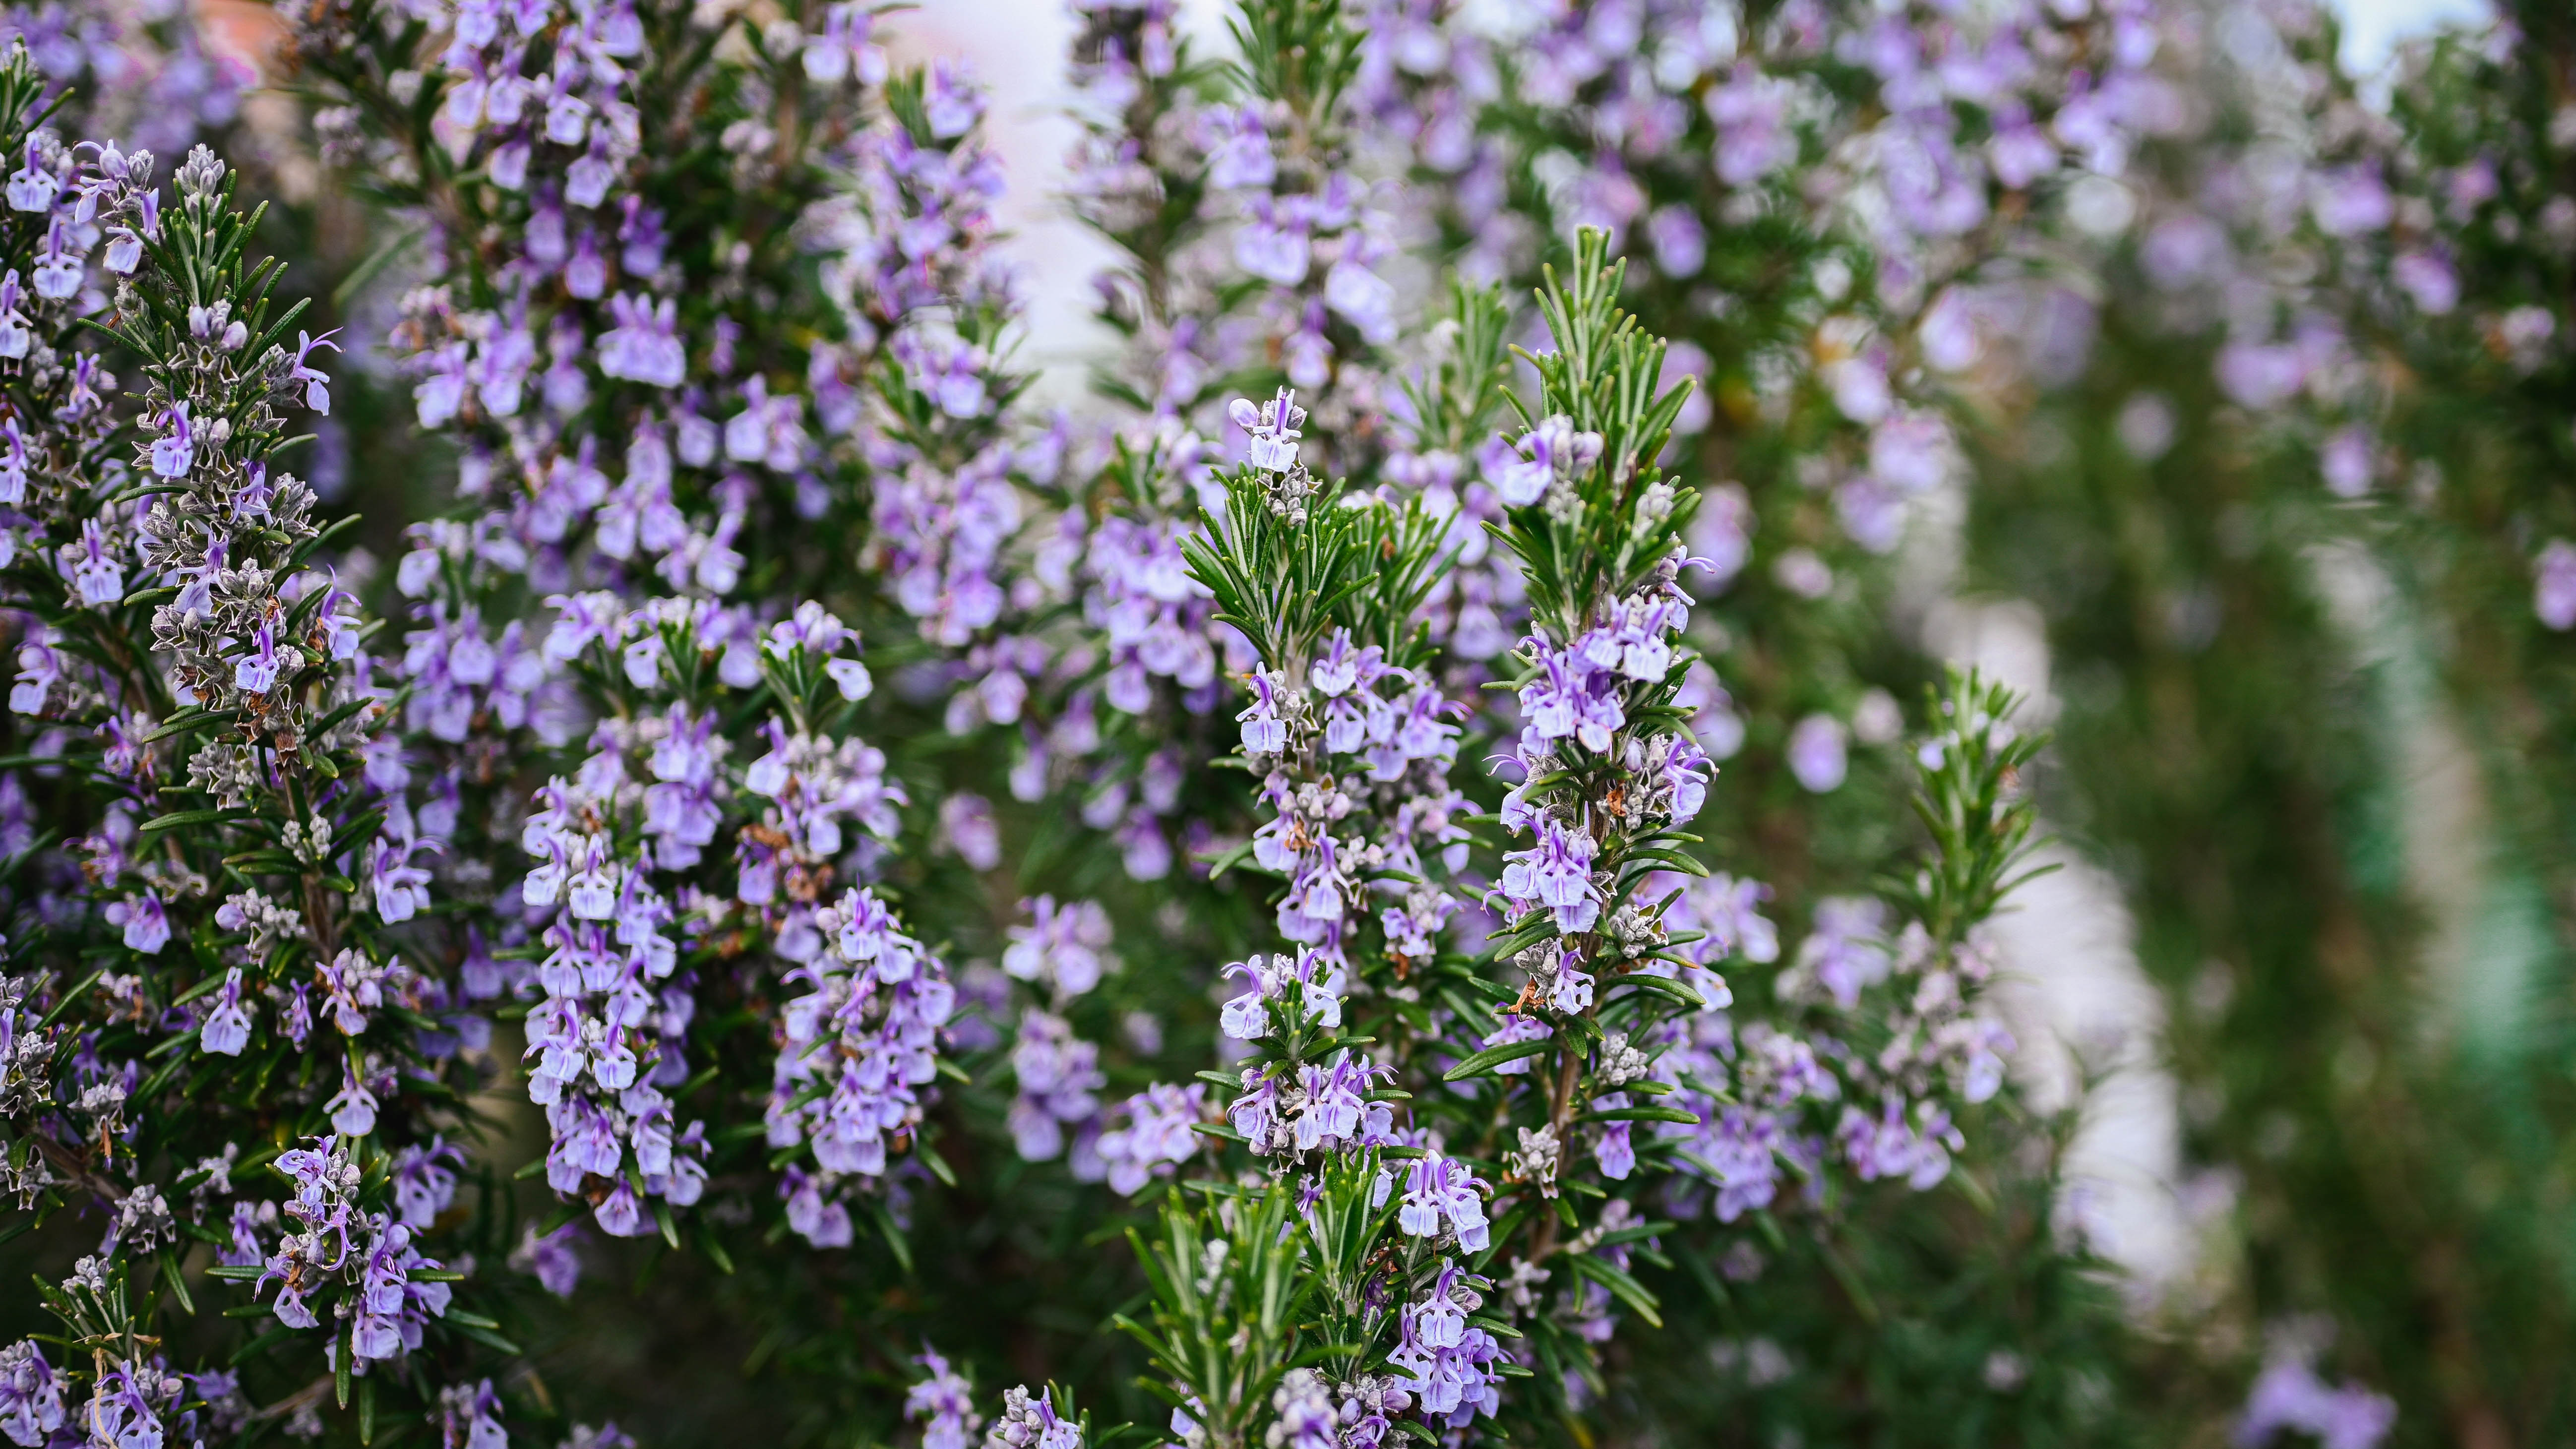 Rosemary which has blossomed